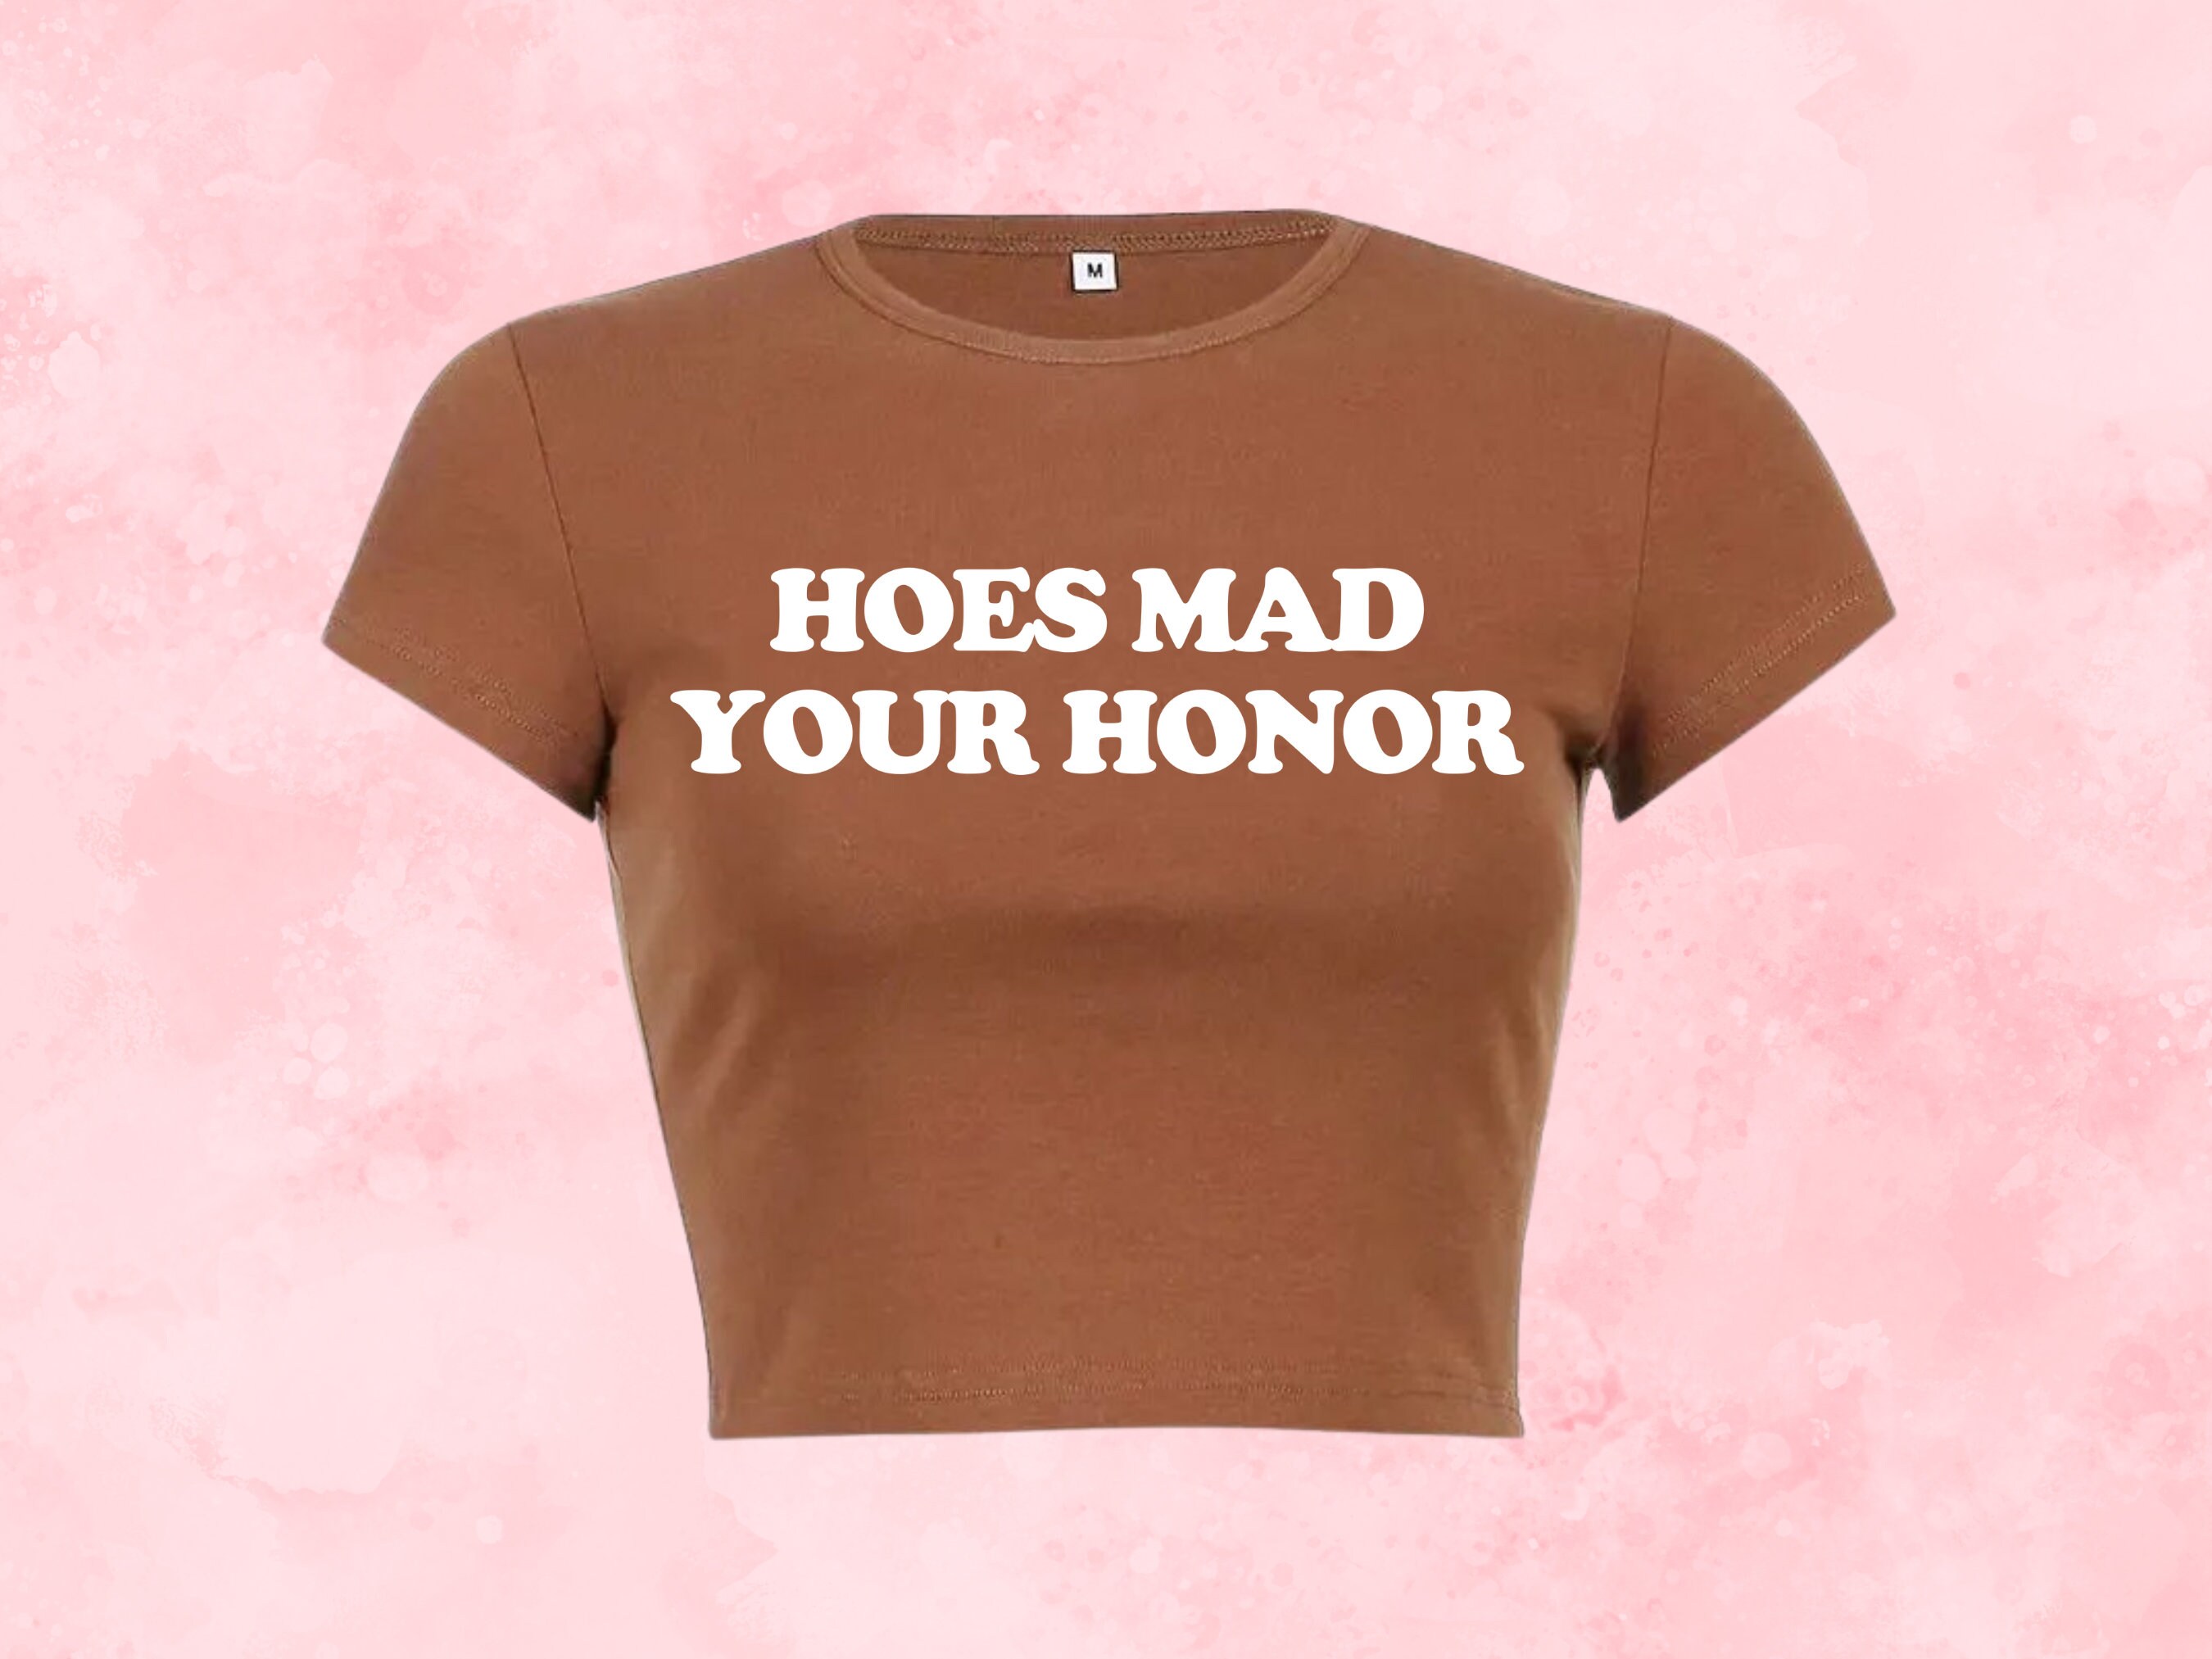 Hoes Mad Your Honor Baby T-shirt, Funny Slogan Crop Tee, 90s Aesthetic  Baddie Girl Y2k 2000s Graphic T-shirt Trending Print Slay Girl 00 Top 